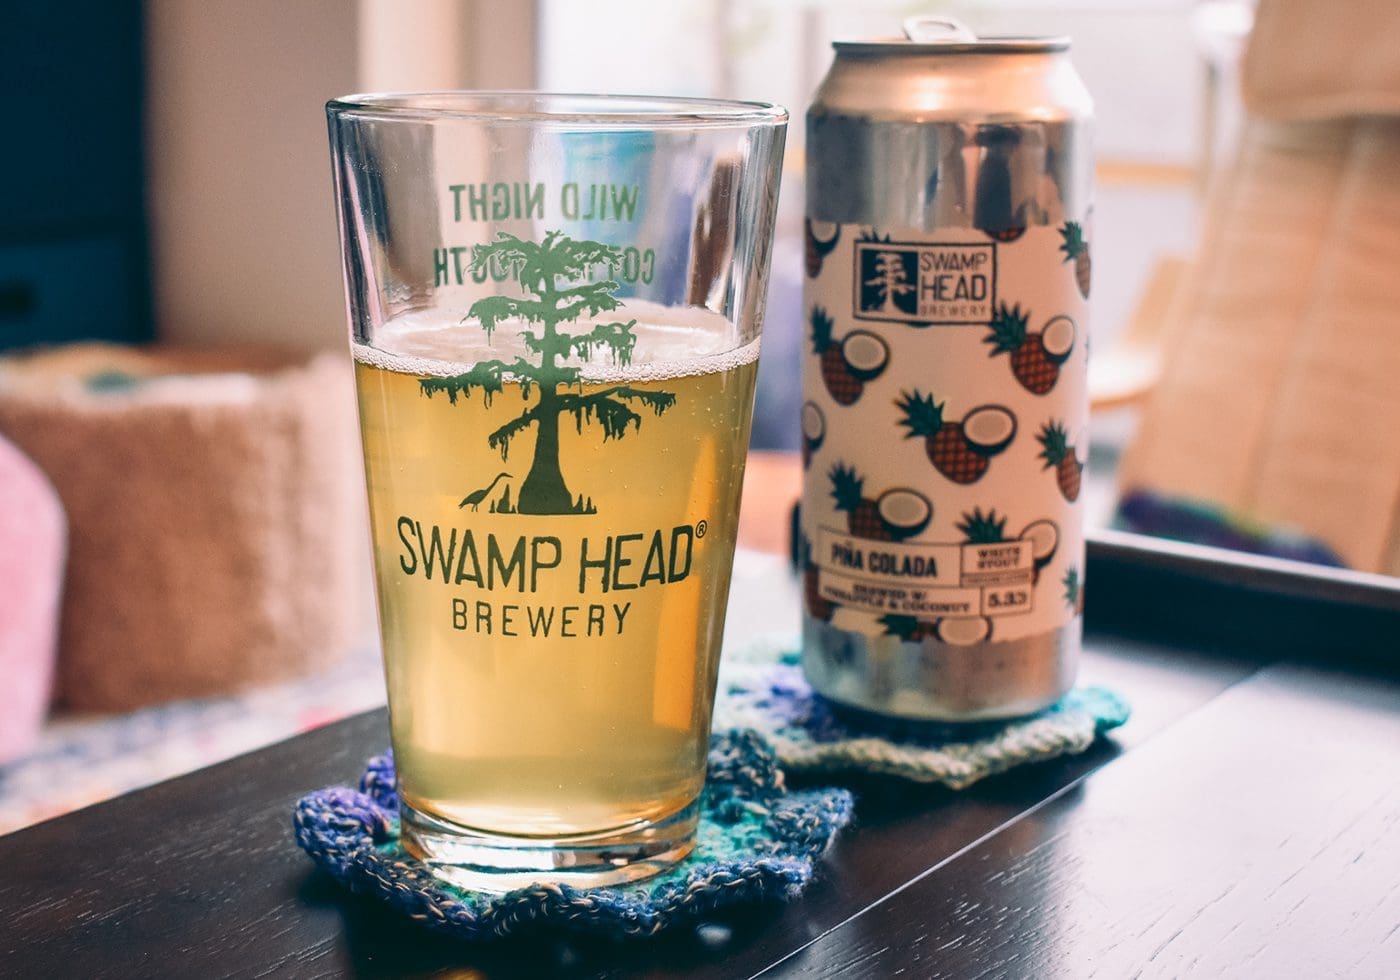 The Florida craft beer scene is ever evolving. Learn more and see my favorite new Florida craft beers from Swamp Head & First Magnitude here.